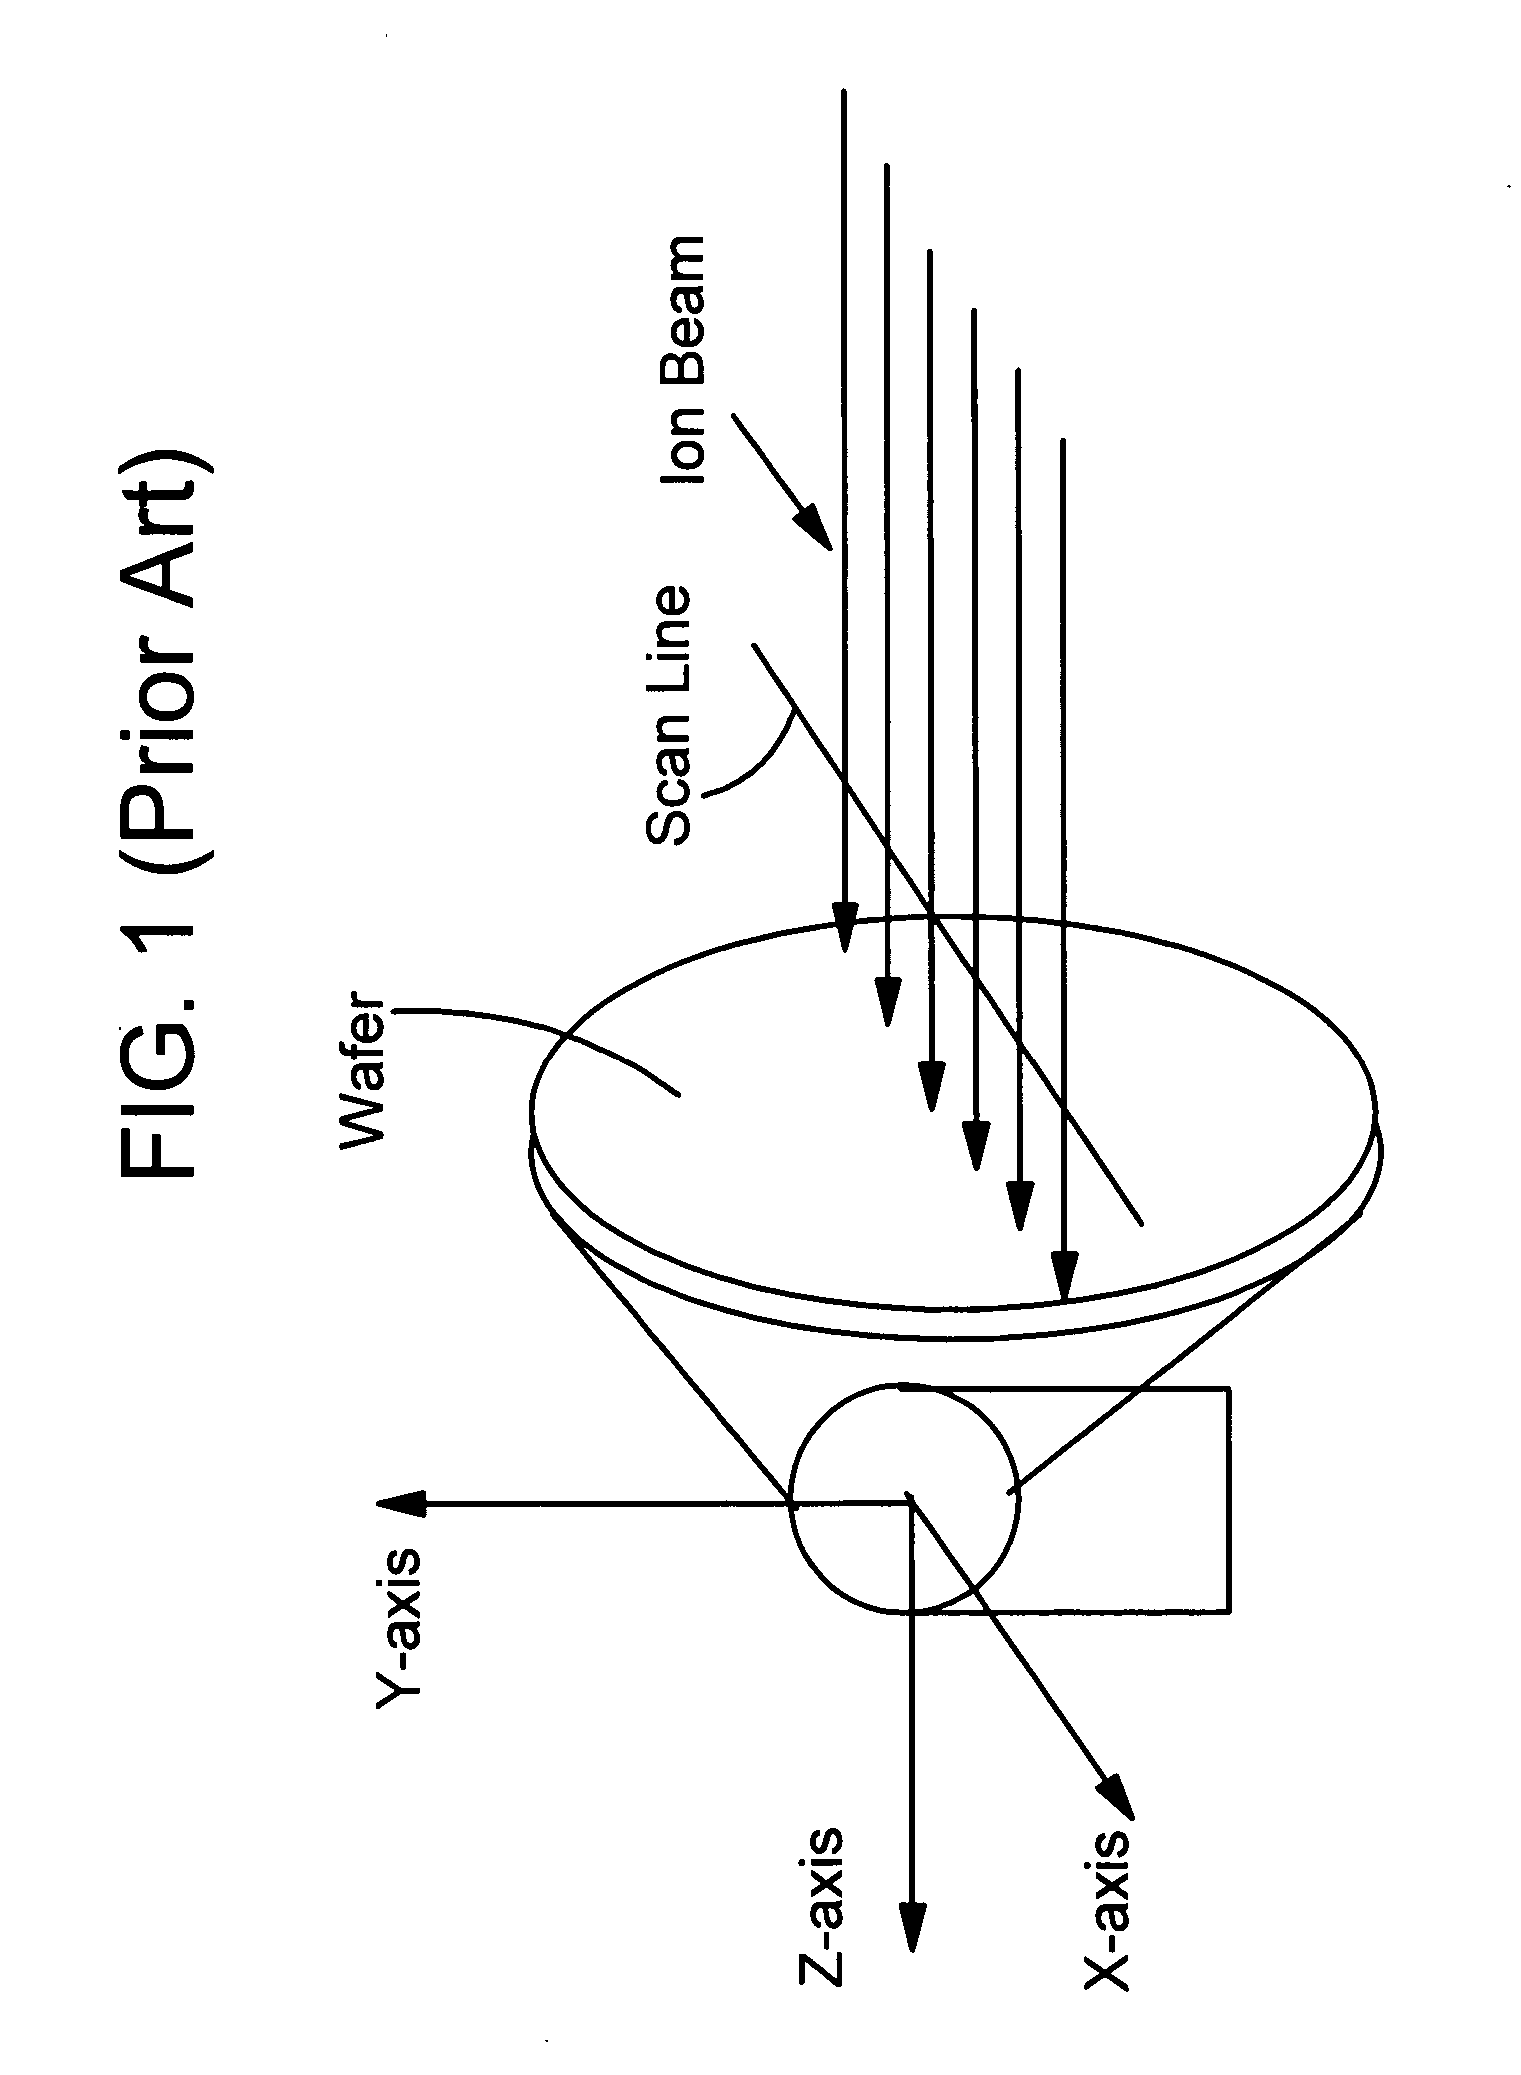 Ion implant ion beam parallelism and direction integrity determination and adjusting